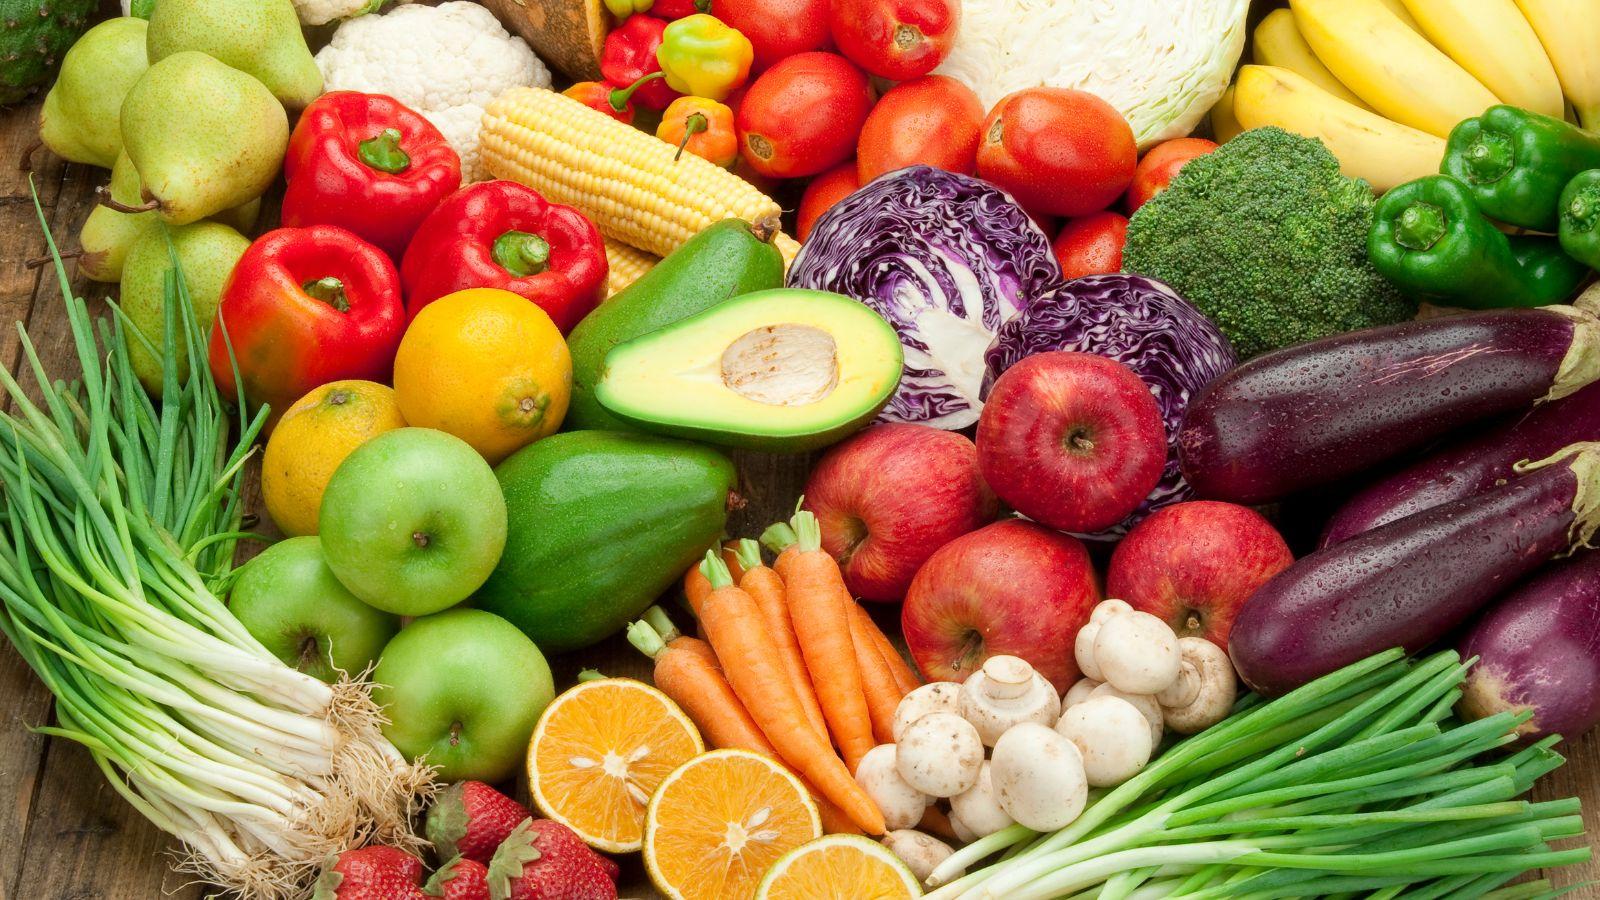 A variety of colorful fruits and vegetables including apples, peppers, carrots, onions, eggplant, tomatoes, mushrooms, and red cabbage.